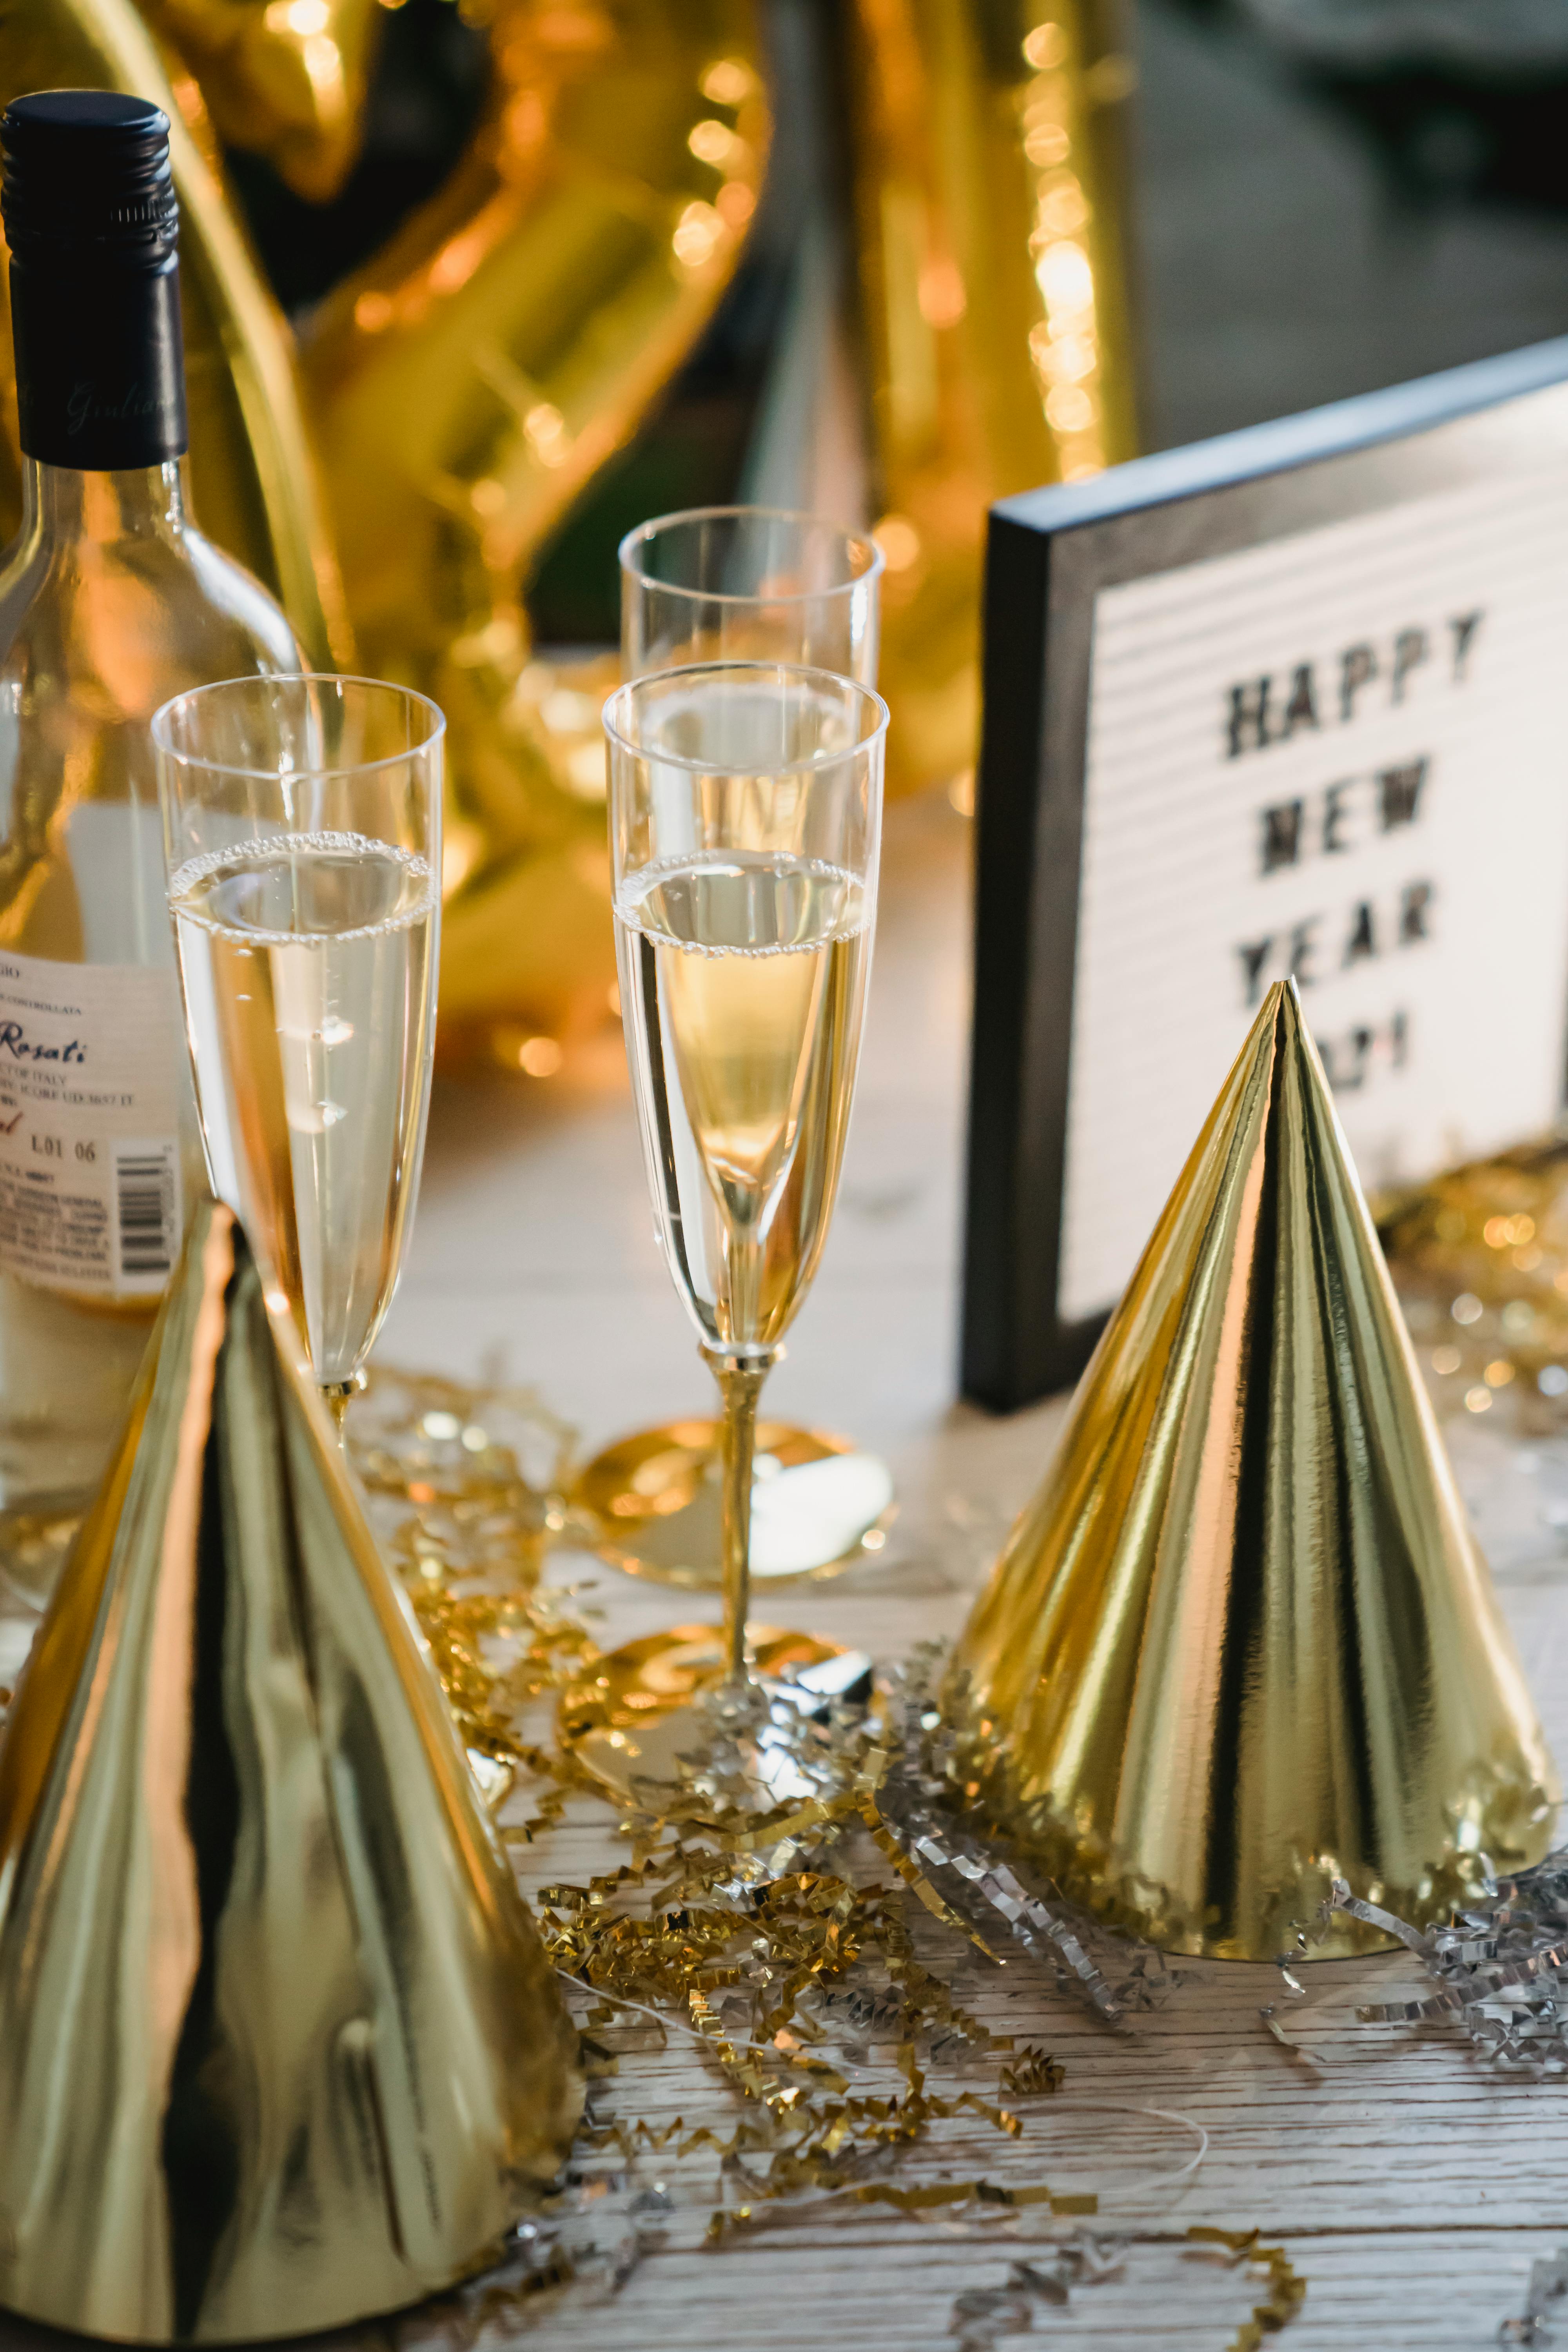 champagne glasses and bottle near festive new year decorations